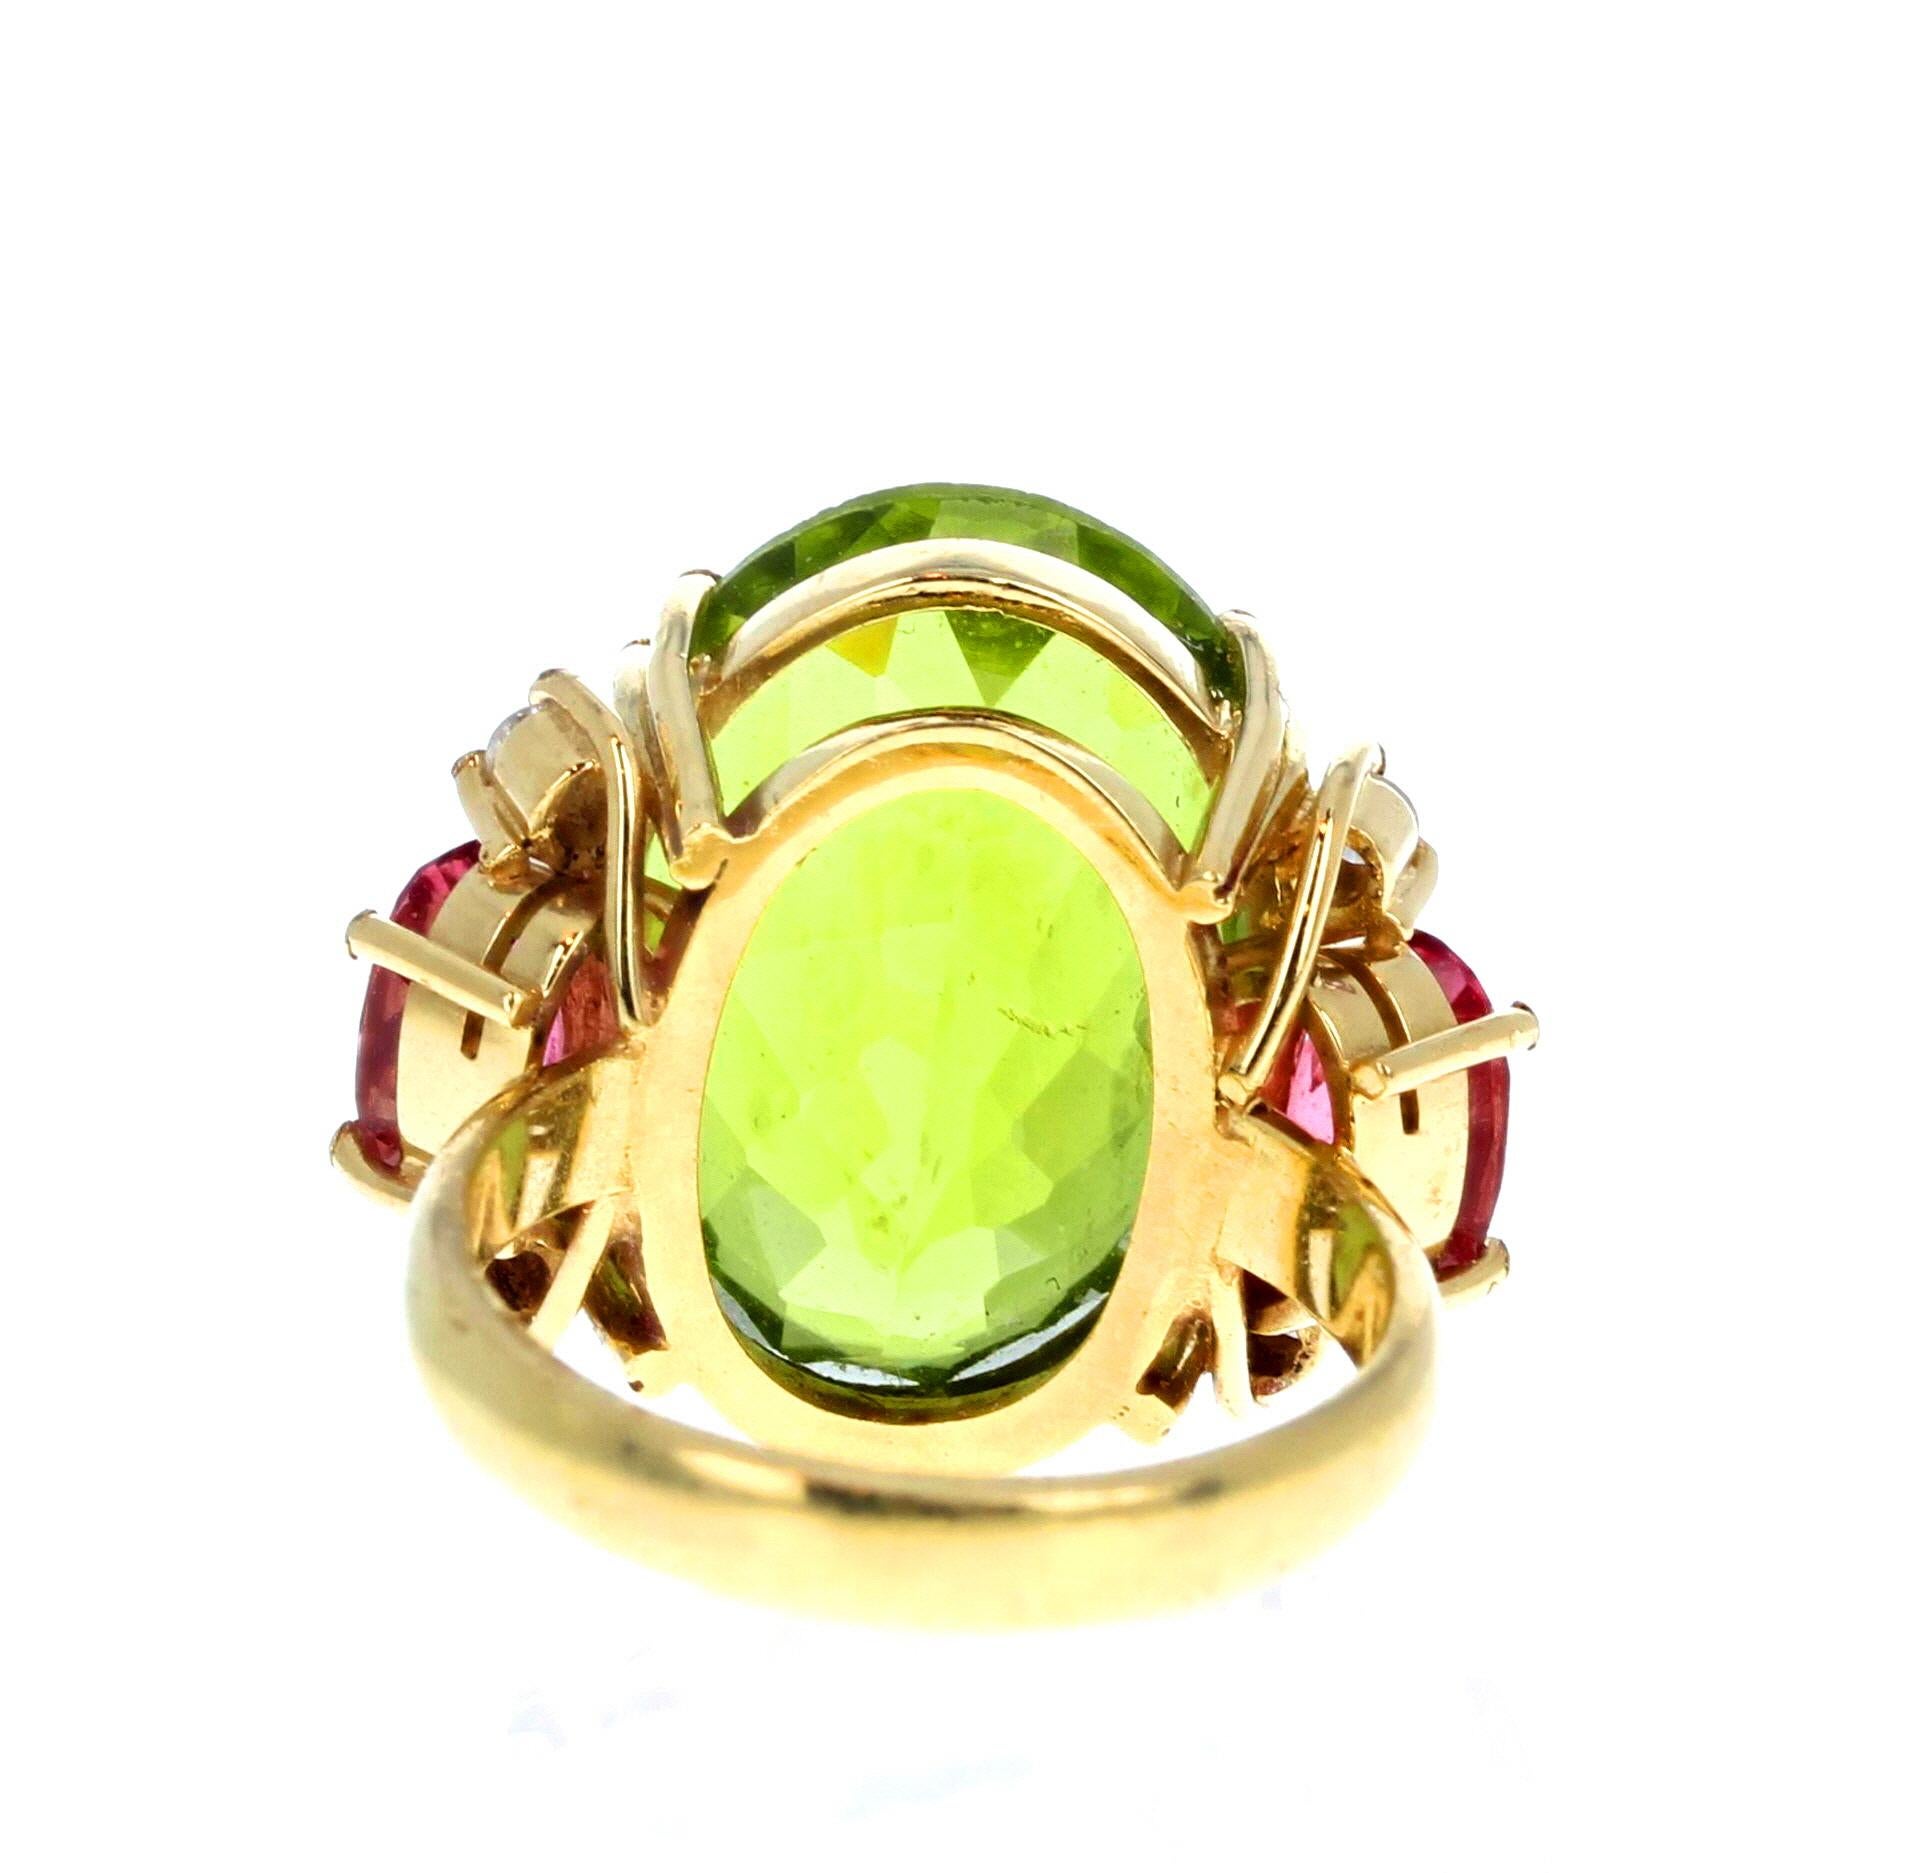 AJD Magnificent Brilliant 14 Ct Green&Pink Tourmalines, Diamonds 18Kt Gold Ring In New Condition For Sale In Raleigh, NC